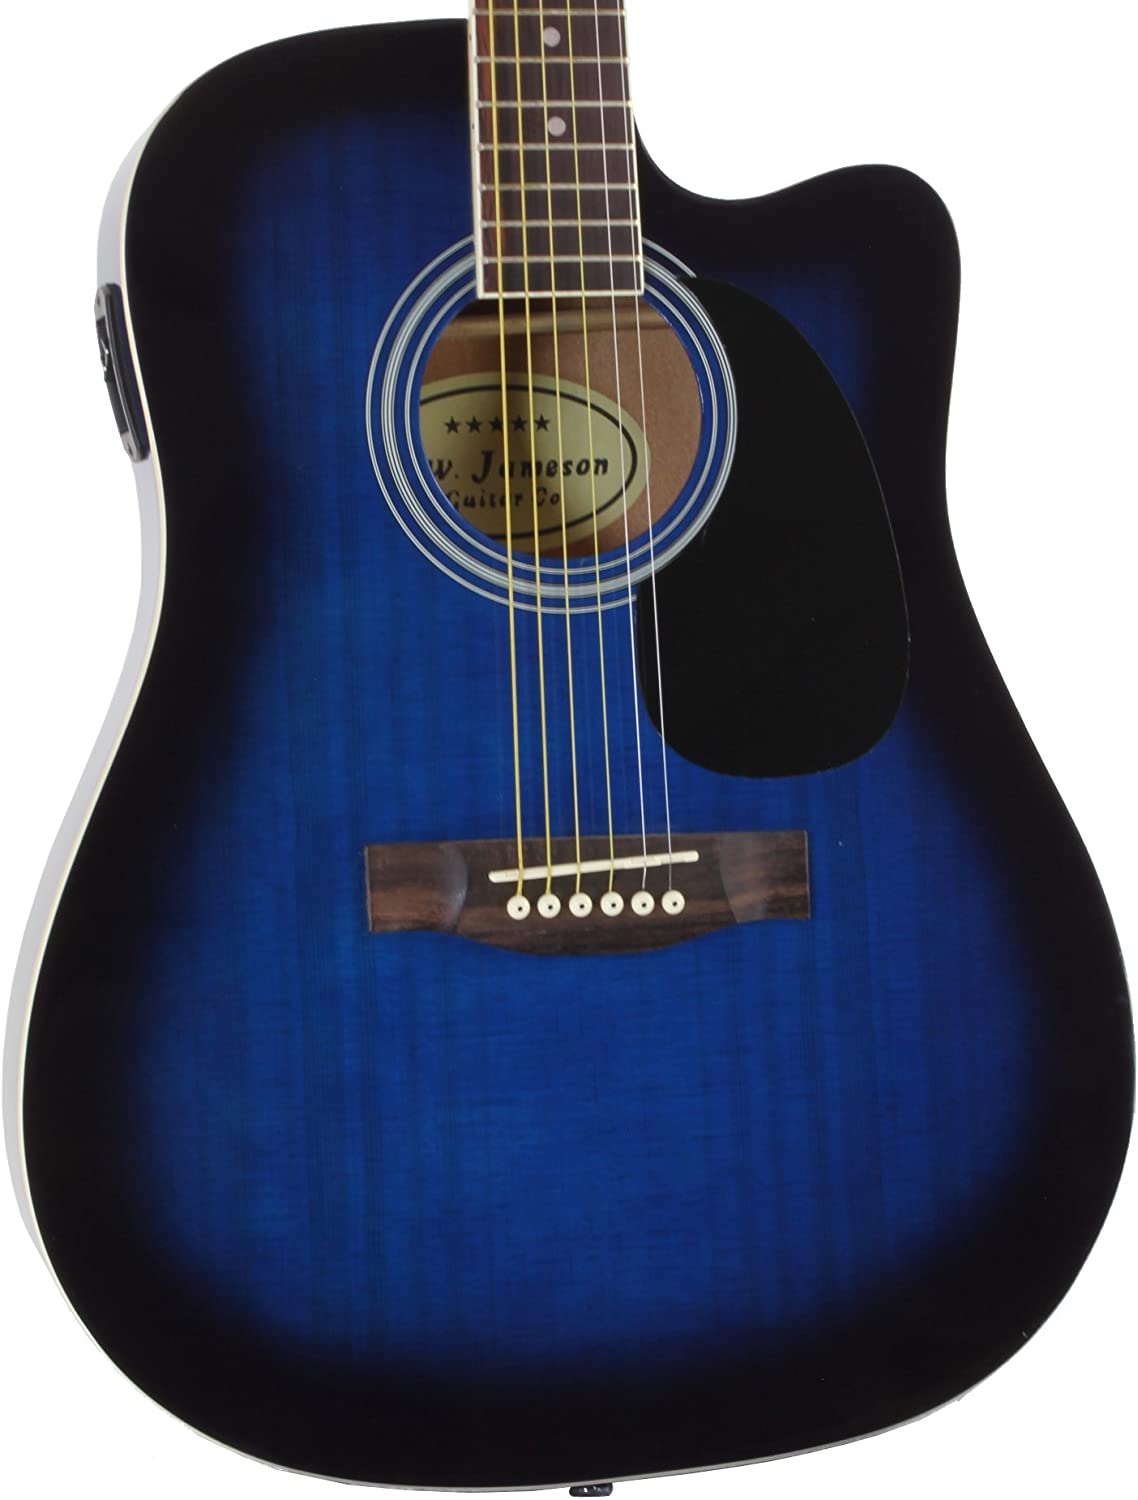 Buy the Best Acoustic Electric Guitar under 500: Features of Two Guitars Price of One